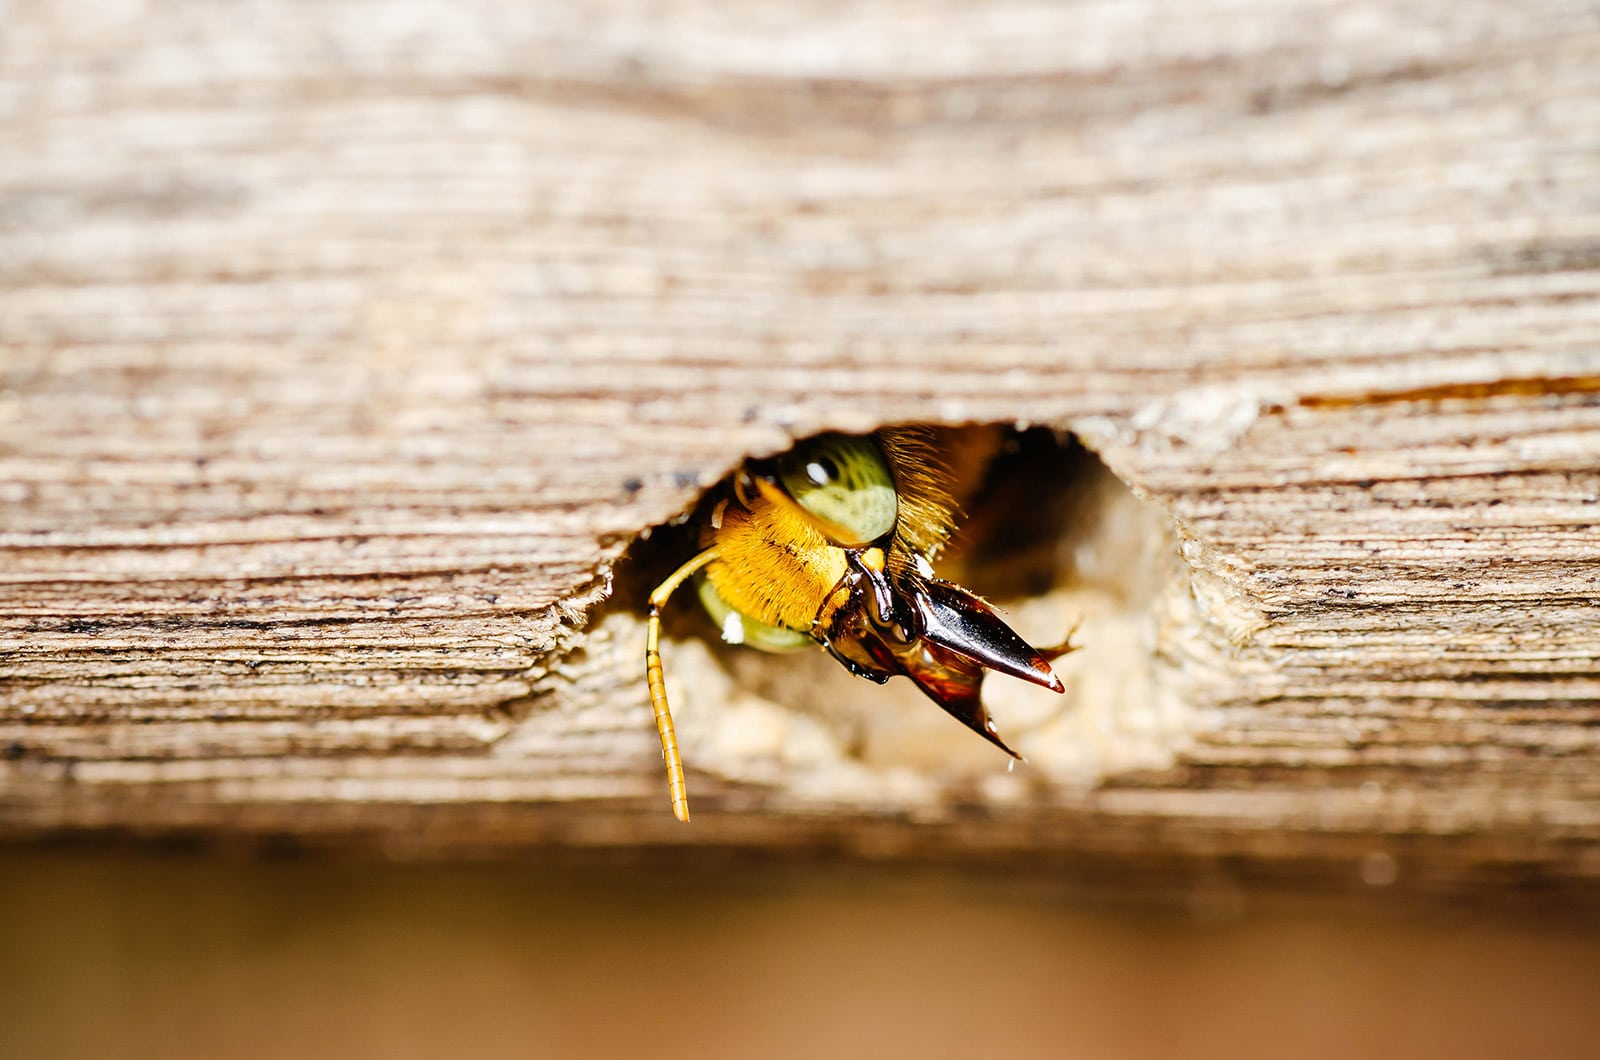 Carpenter bee peering out of a hole in the wood